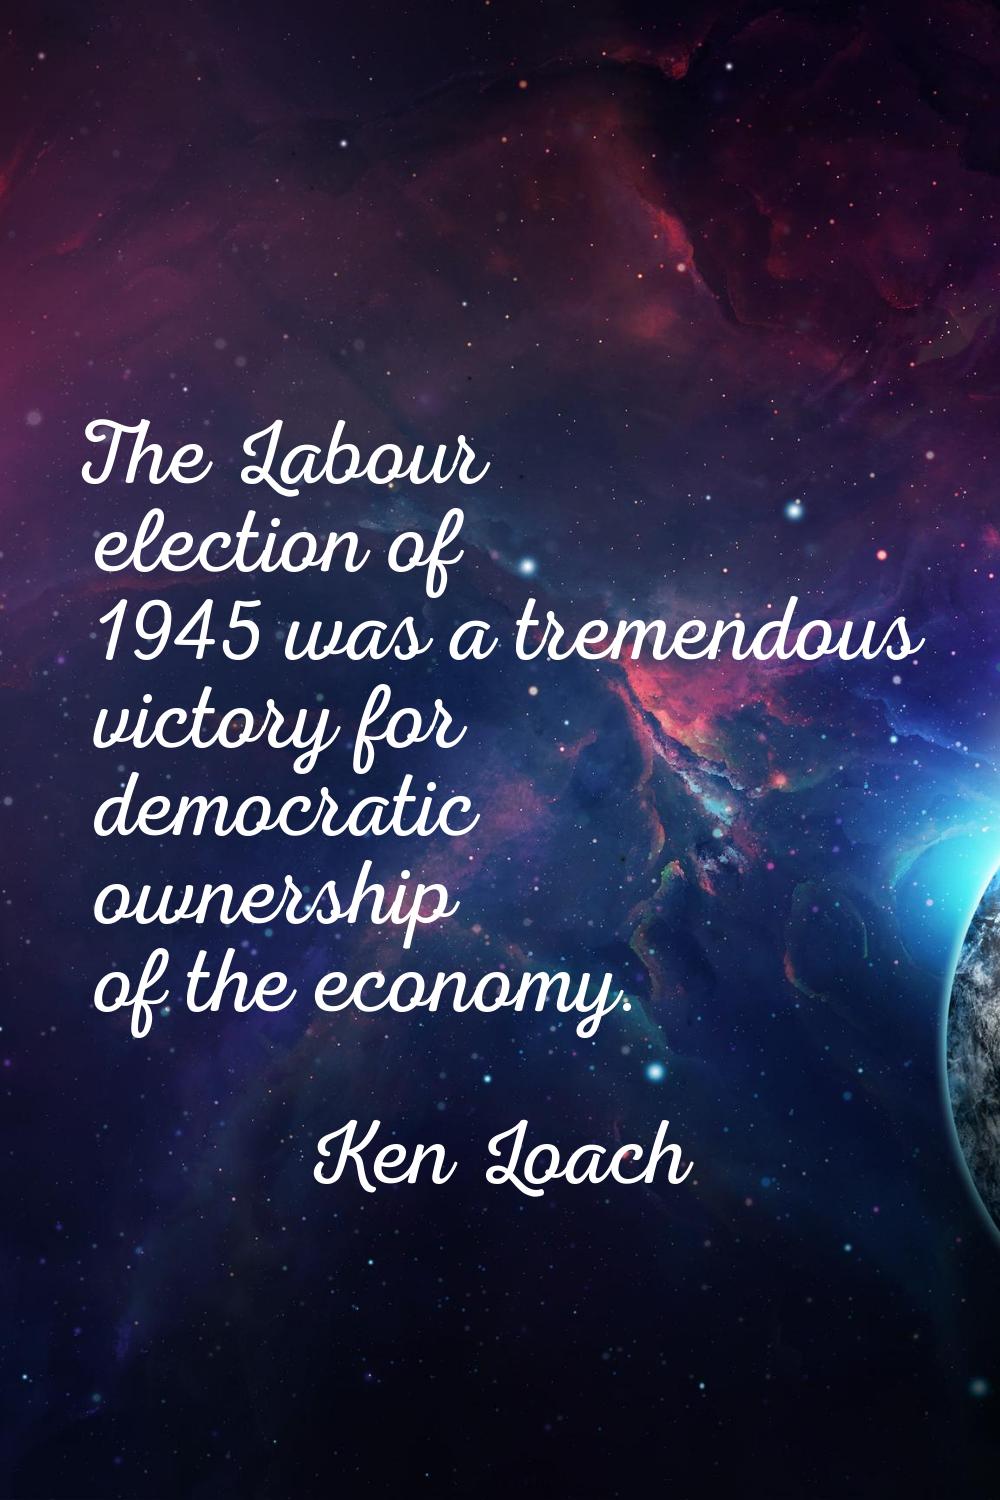 The Labour election of 1945 was a tremendous victory for democratic ownership of the economy.